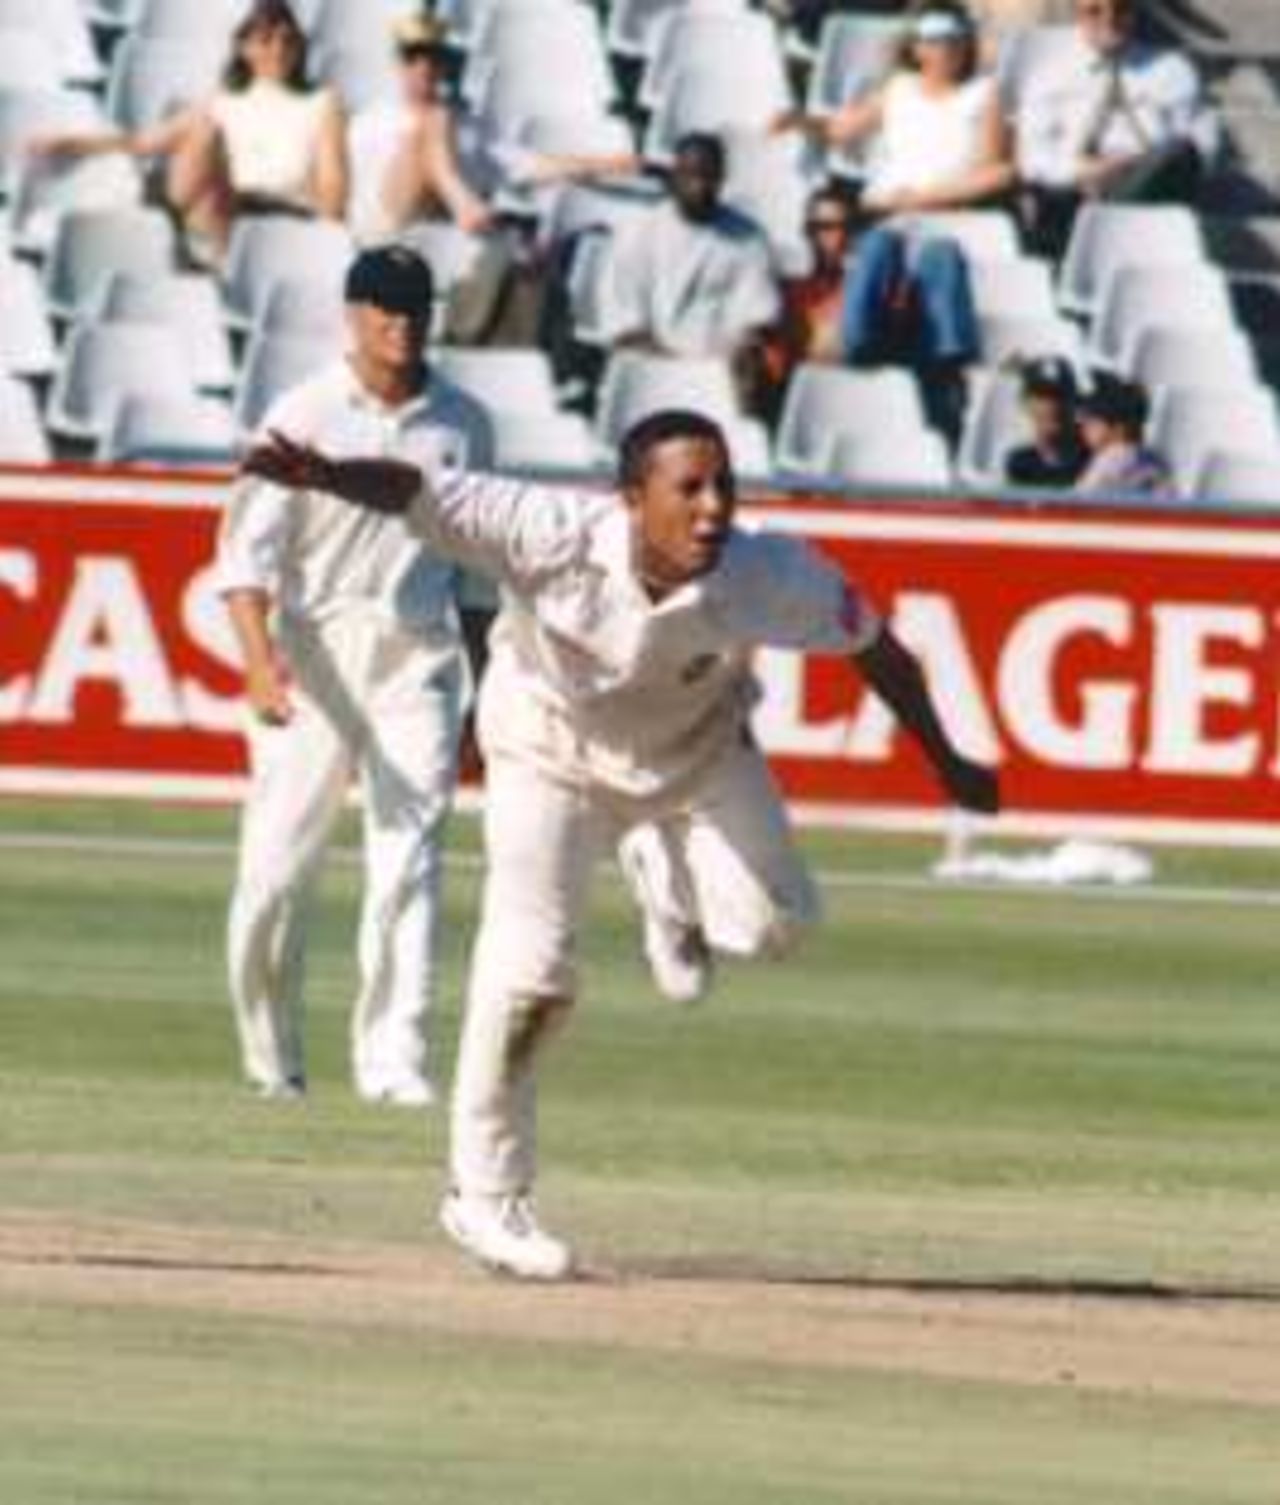 Paul Adams bowling, South Africa v Sri Lanka, 1st Test at Newlands, Cape Town, March 18-23 1998.